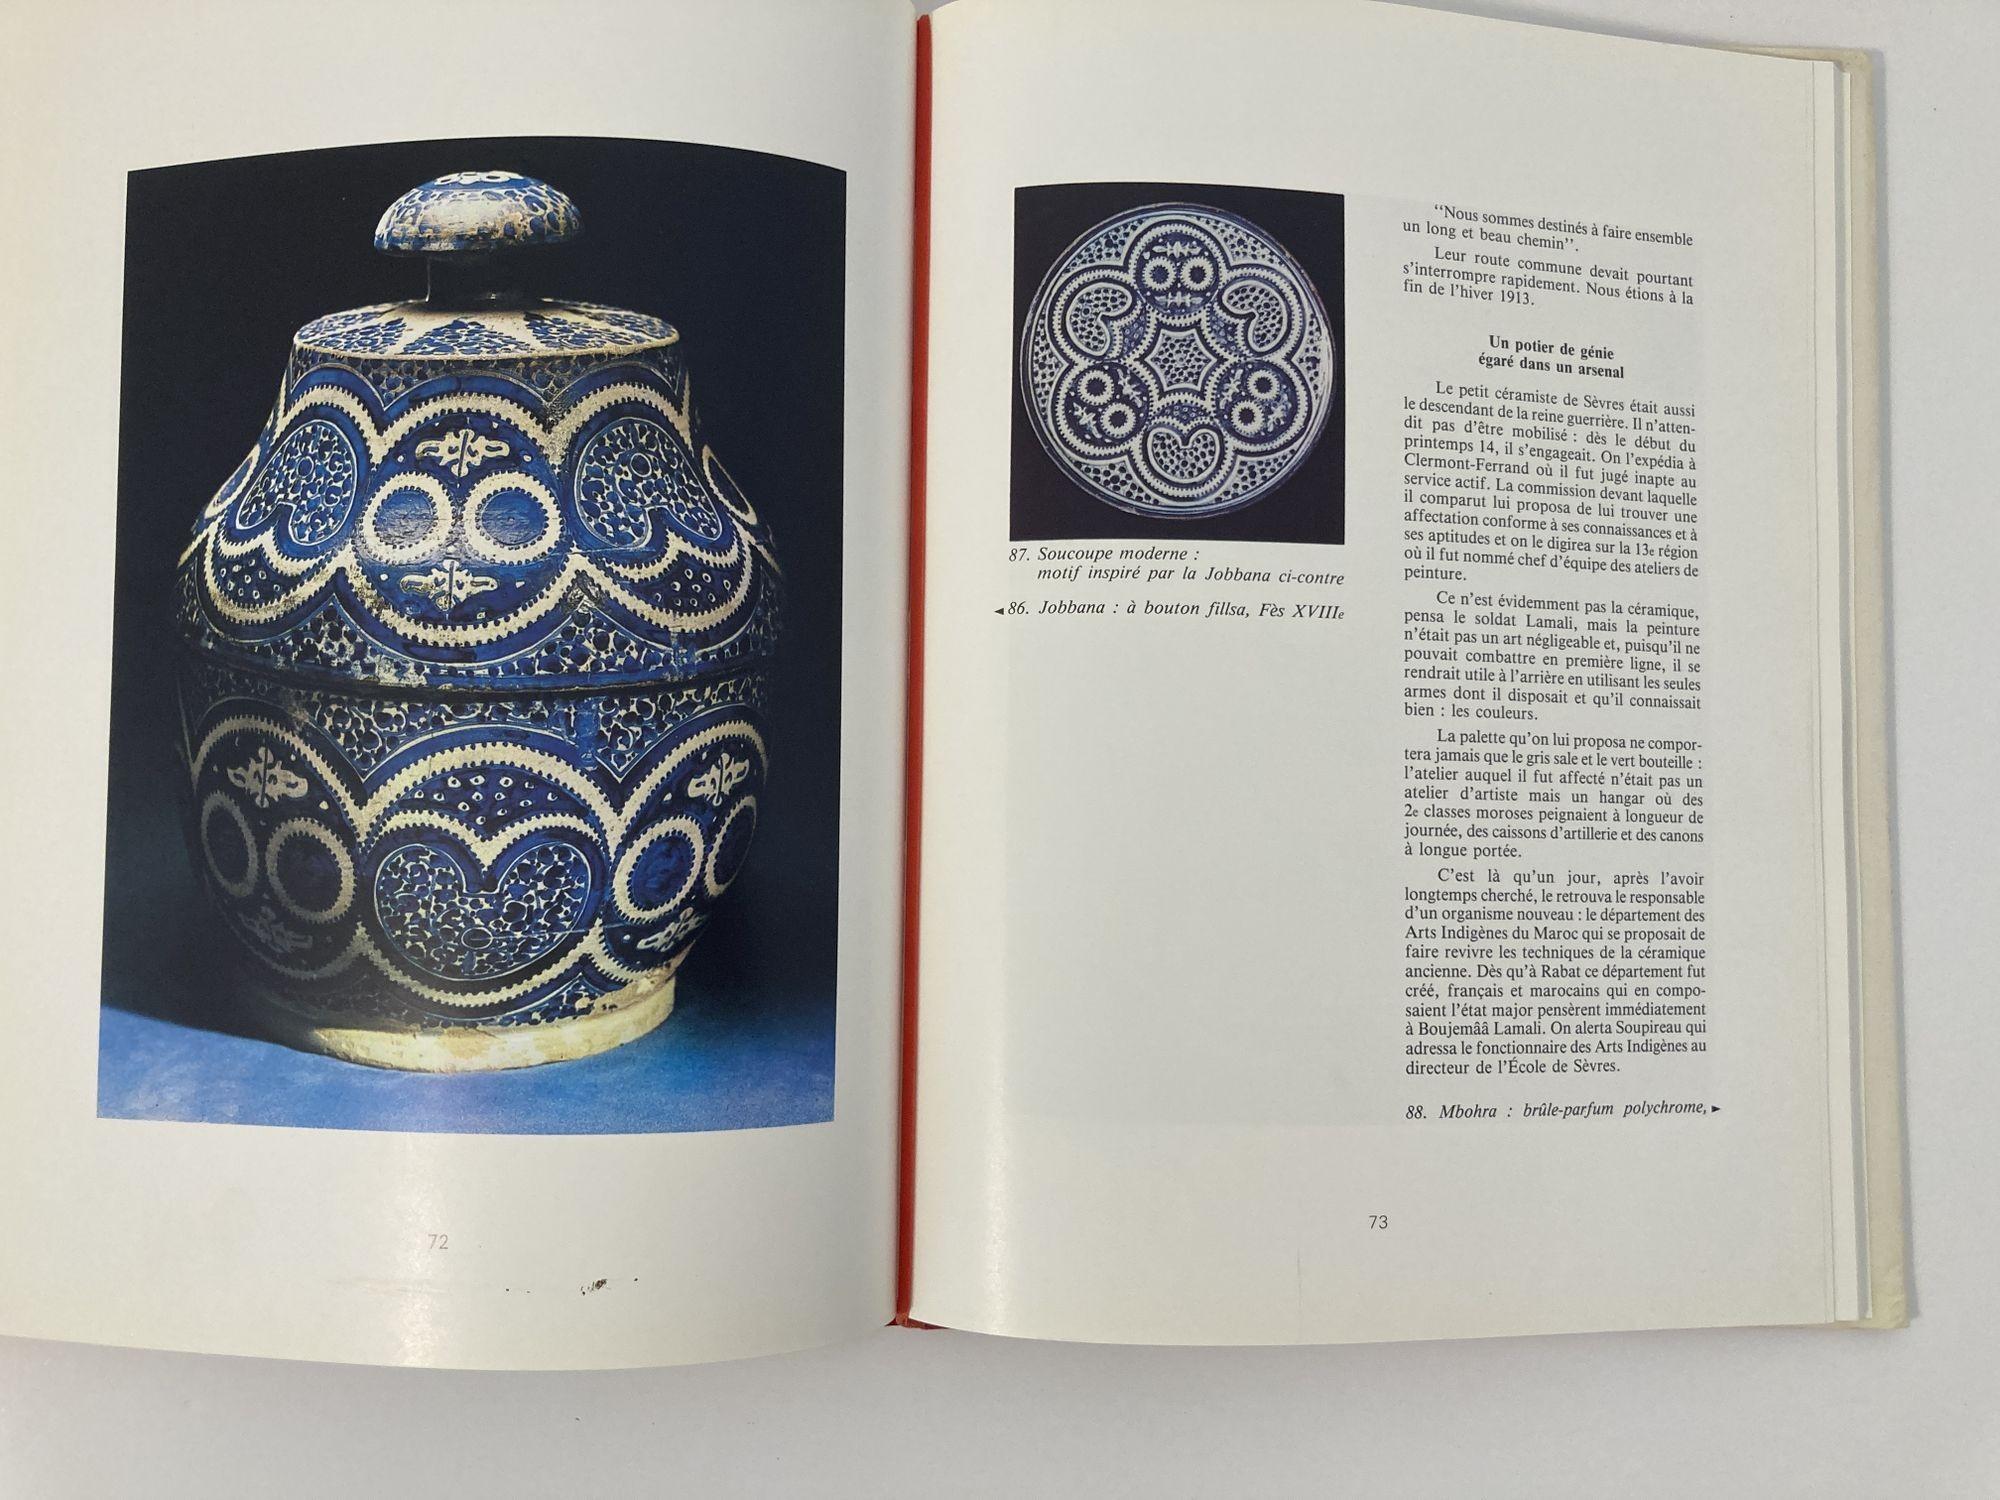 Moroccan Pottery La Poterie Marocaine by André Boukobza French Edition Hard For Sale 6